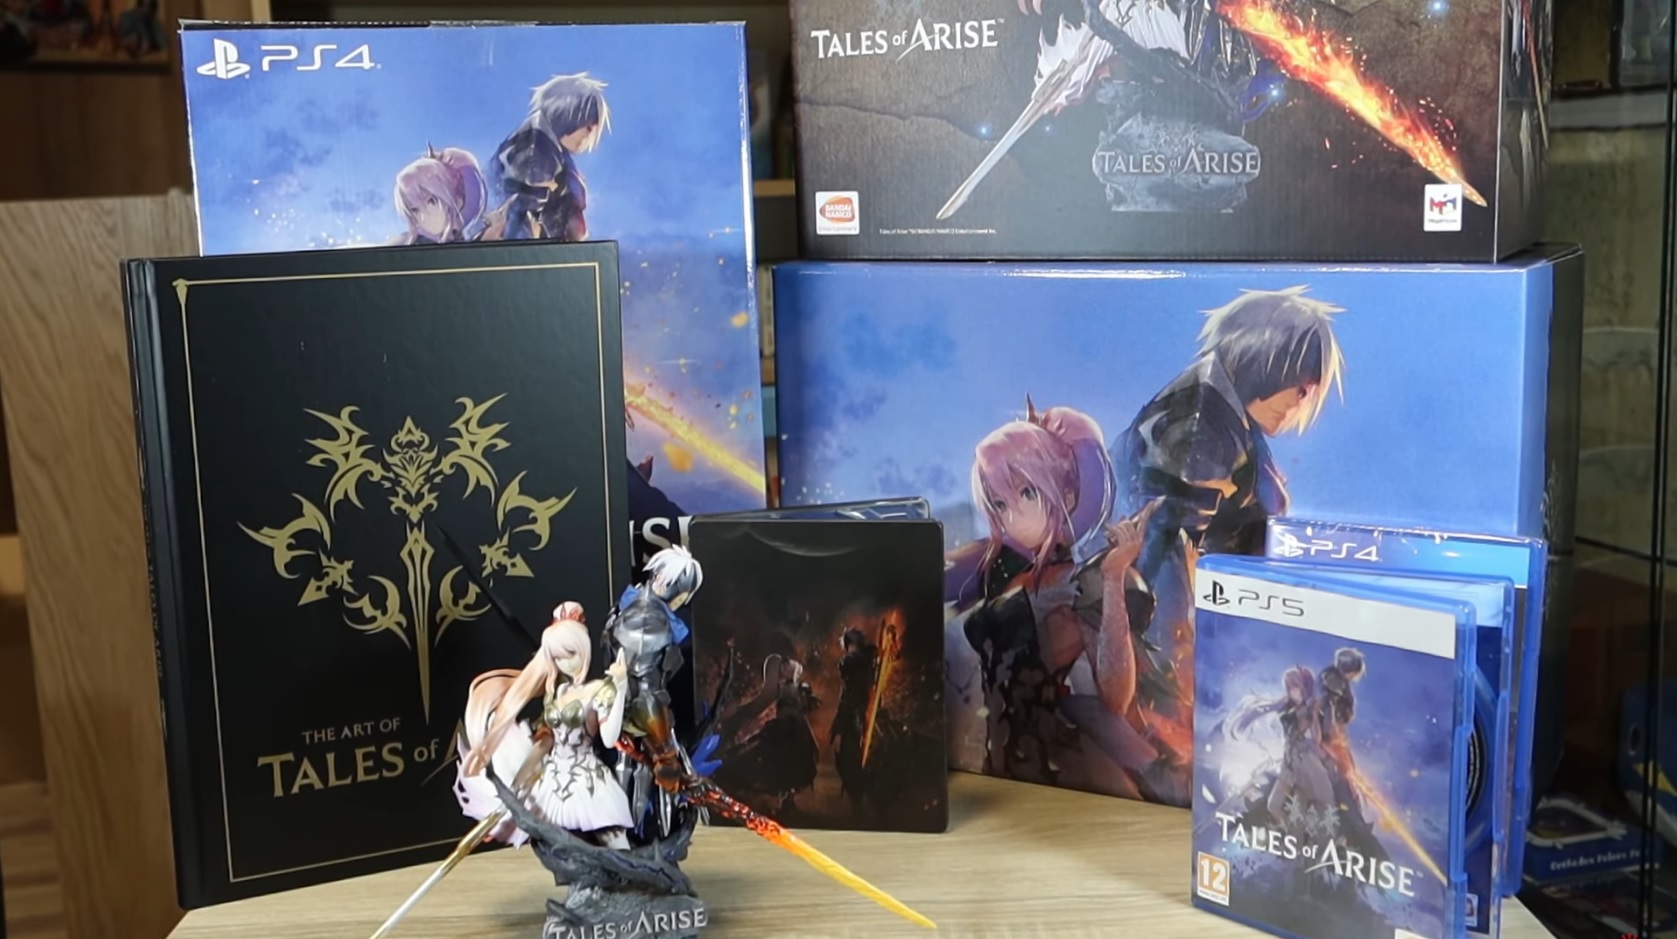 tales-of-arise